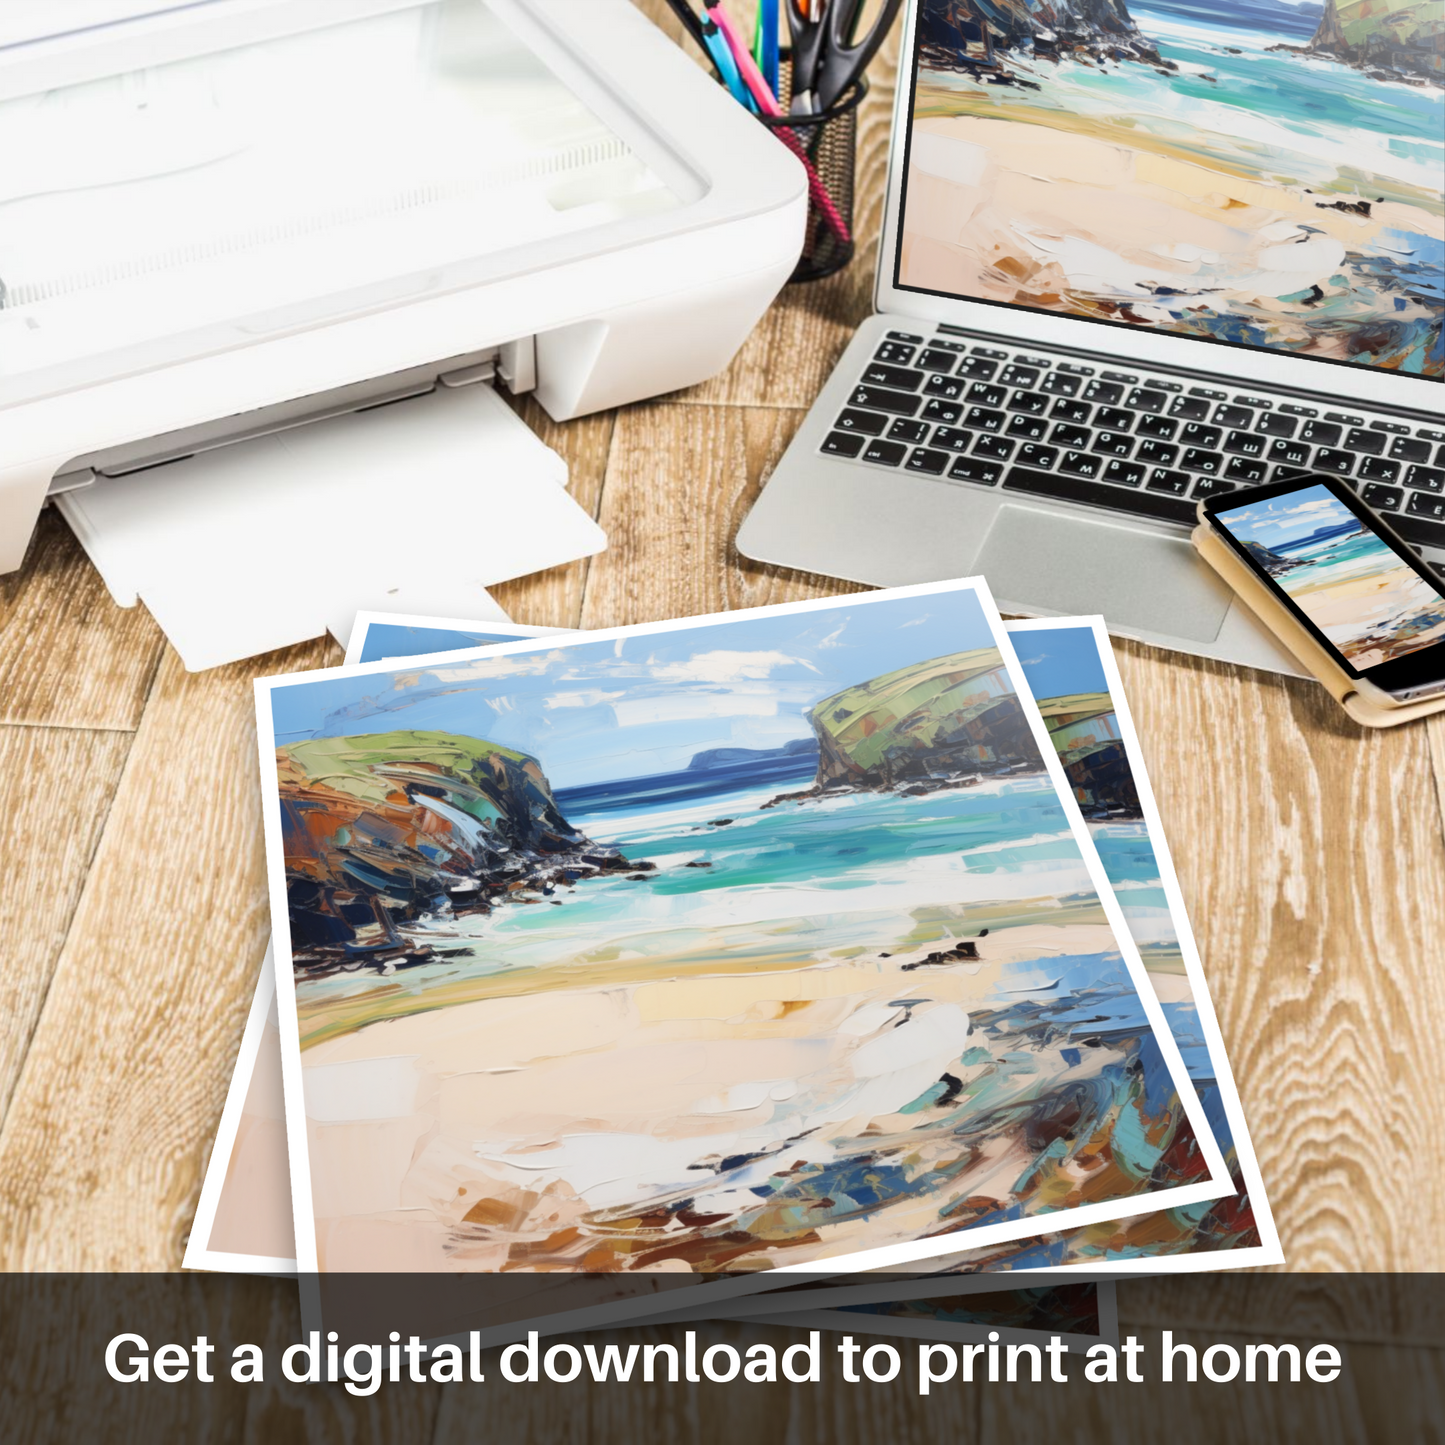 Downloadable and printable picture of Sandwood Bay, Sutherland